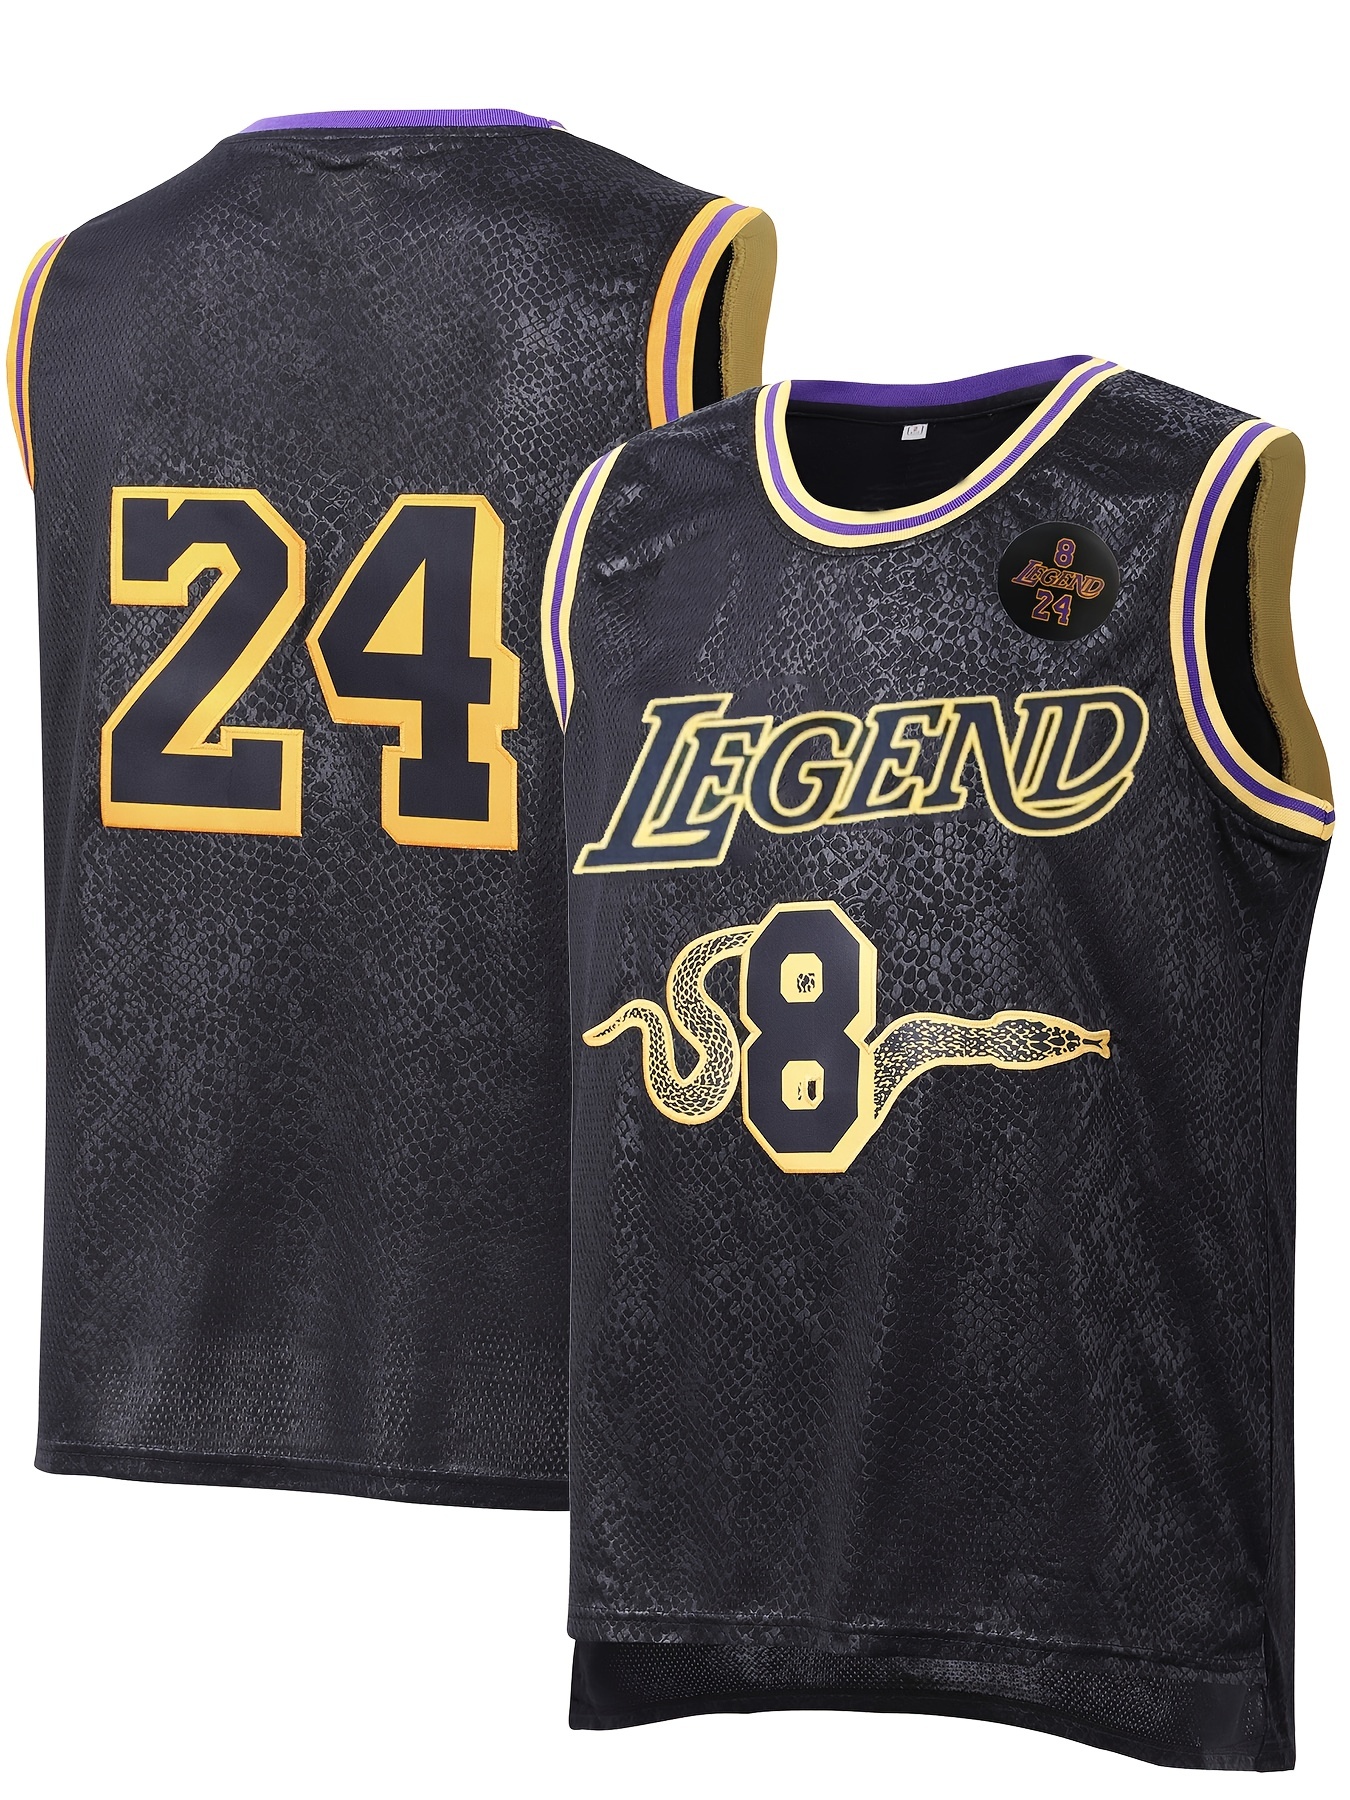 Temu Men's Legend #824 Embroidered Basketball Jersey, Retro Breathable Sports Uniform, Sleeveless Basketball Shirt for Training Competition Party